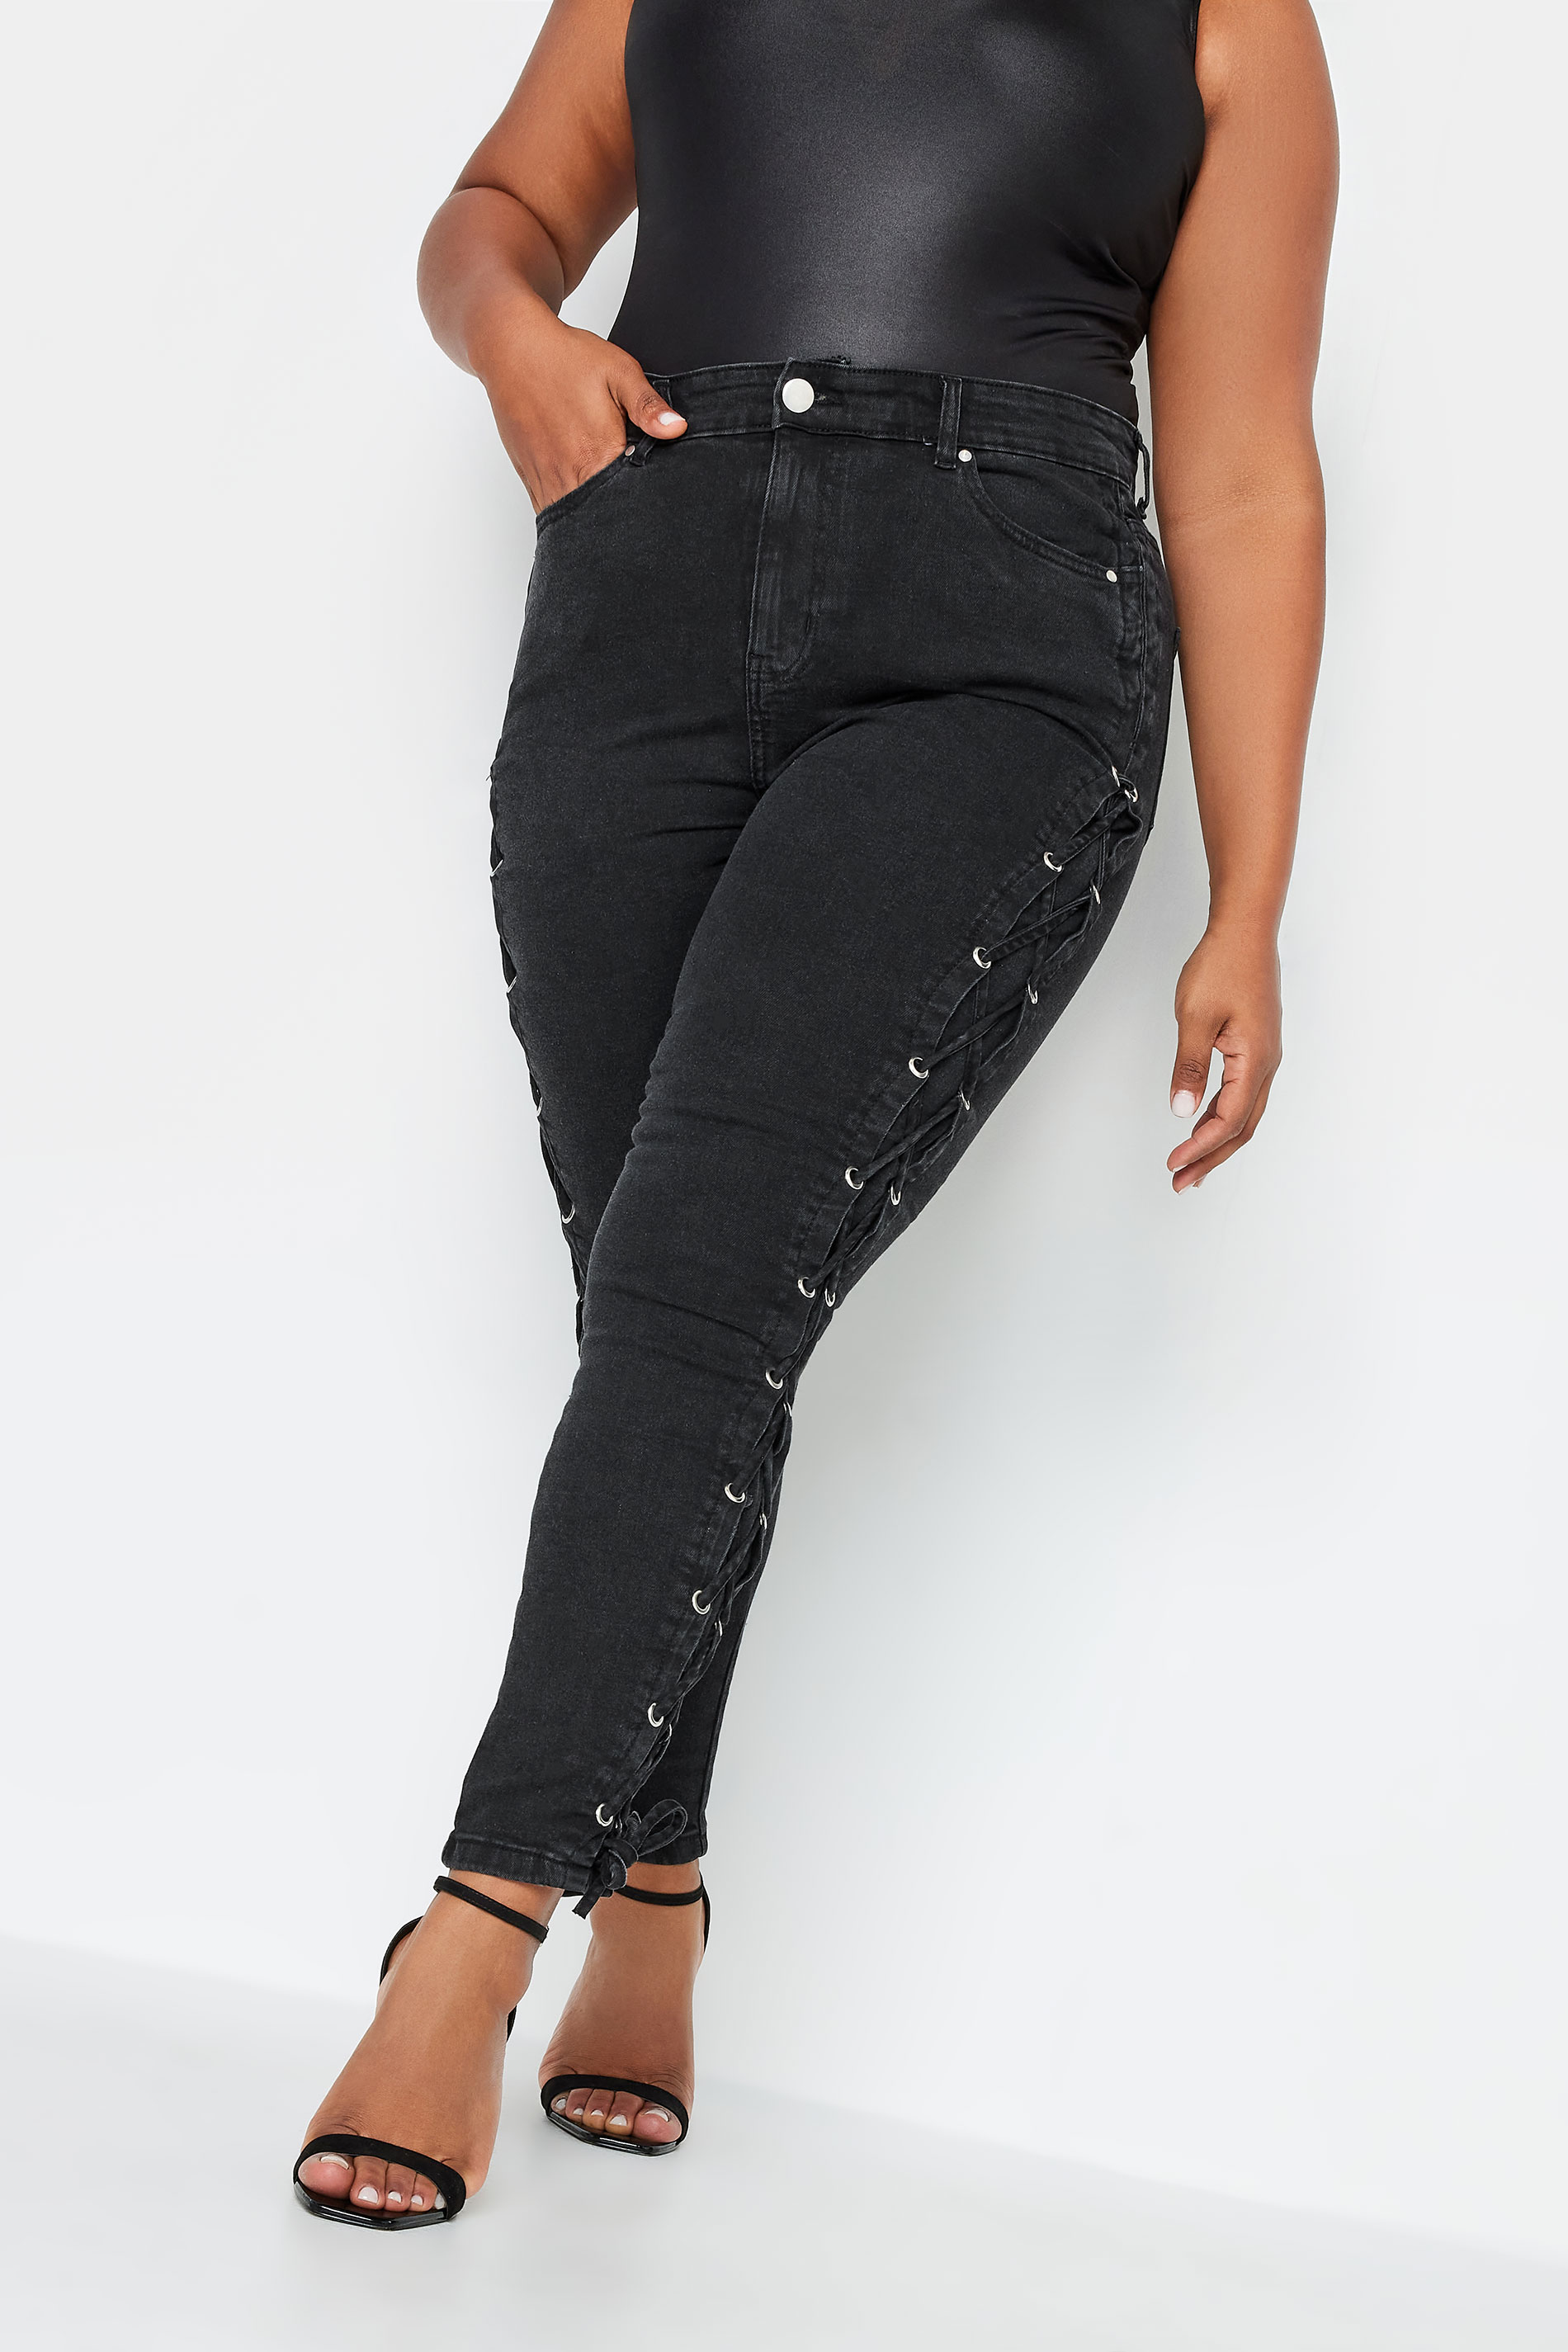 YOURS Plus Size Black Lace Up Detail Skinny AVA Jeans | Yours Clothing 1